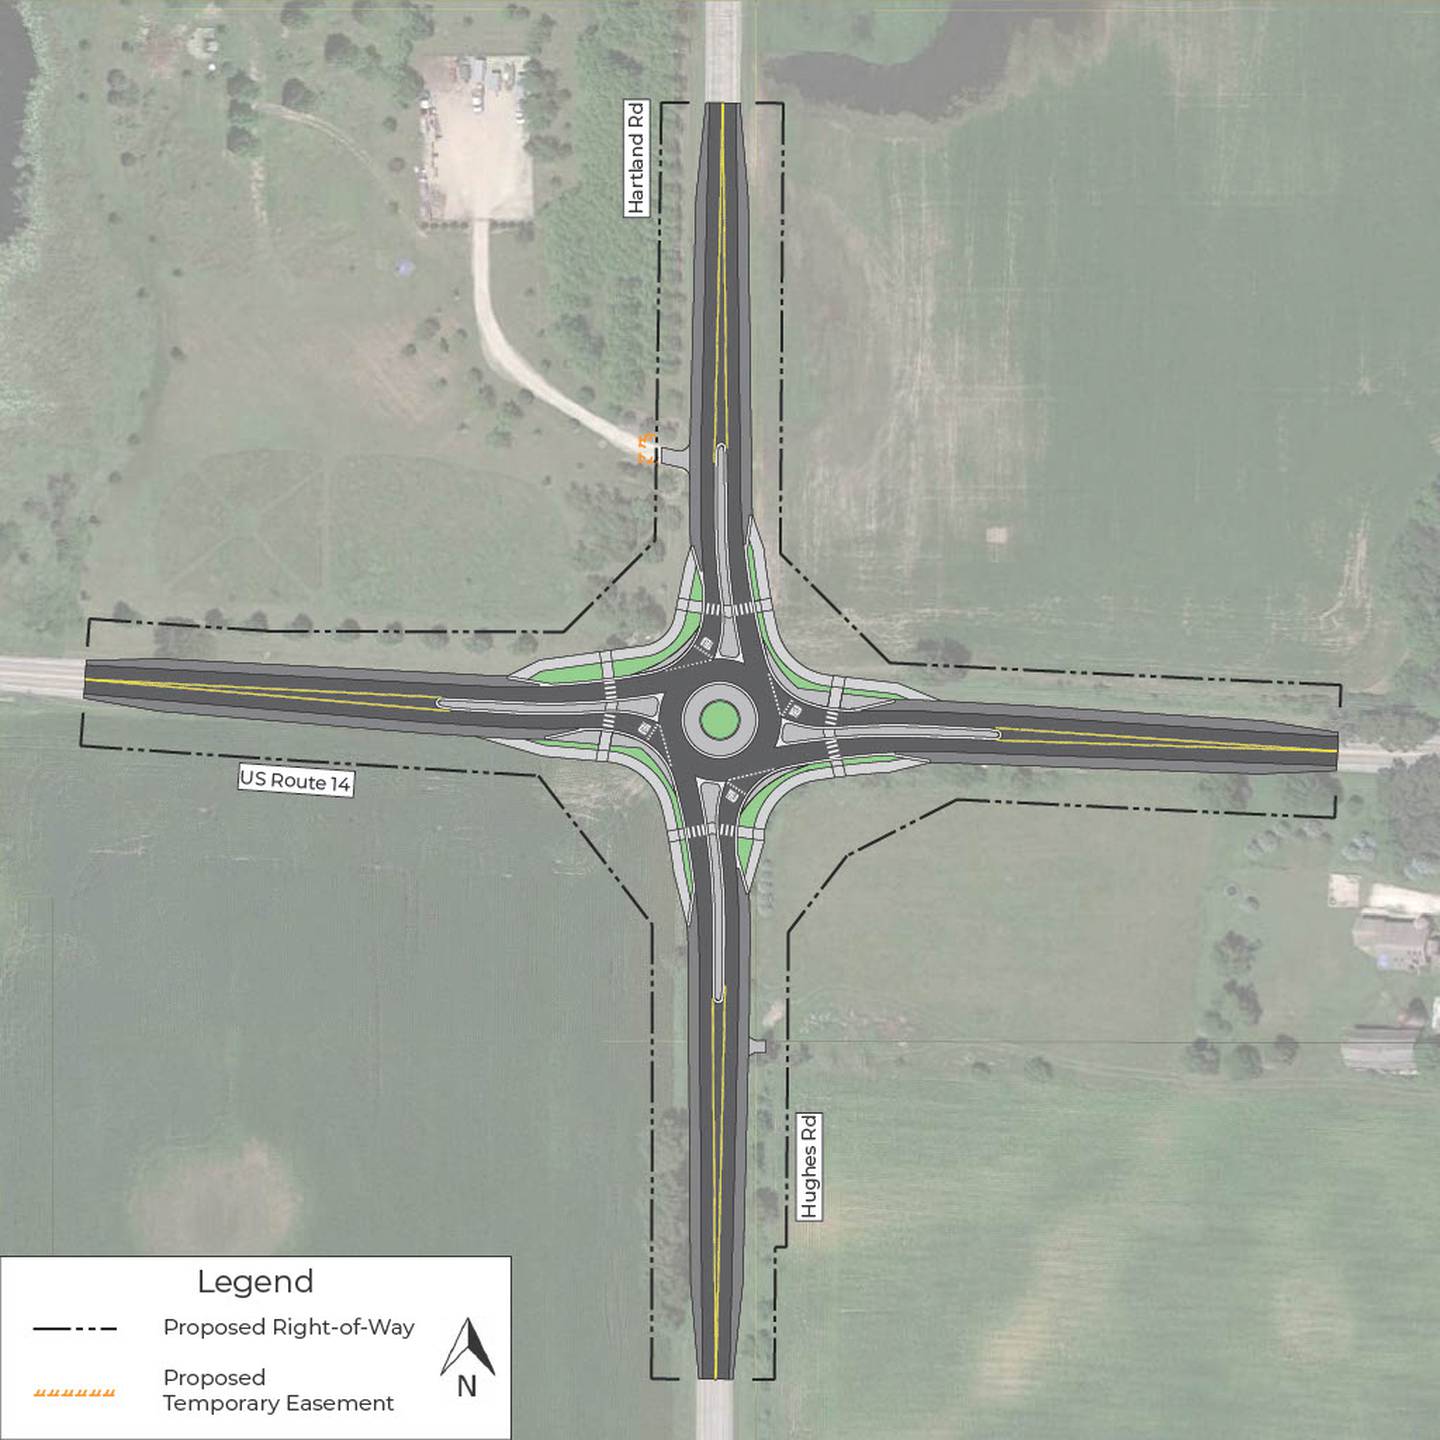 The most popular idea to improve the intersection of Route 14 and Hartland/Hughes roads is a roundabout. Public comment for the intersection opened Monday, Jan. 30, and will continue through Feb. 24, 2023.